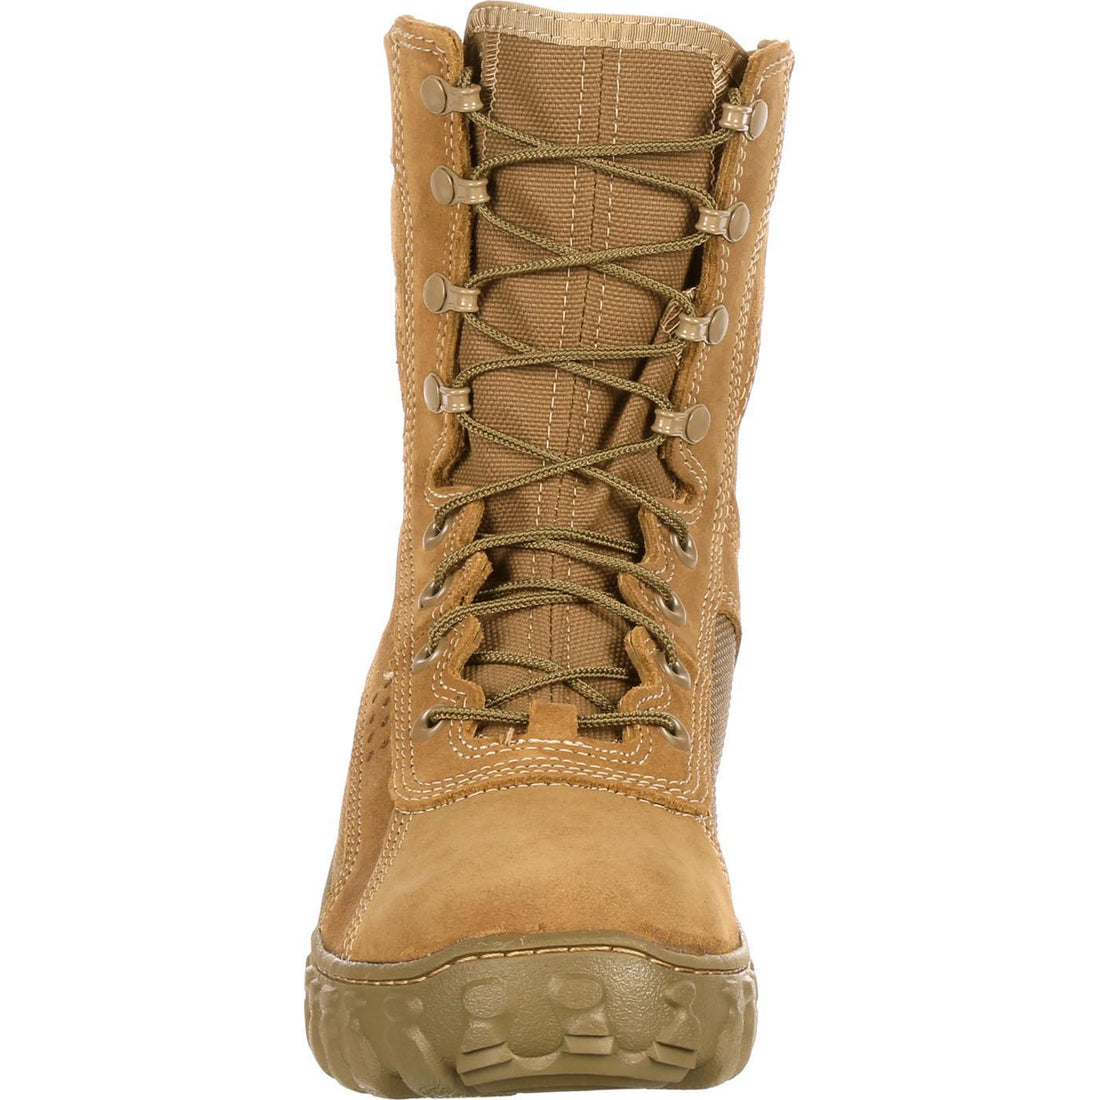 Apparel - Feet - Boots - Rocky S2V Hot Weather Military Boots (104)